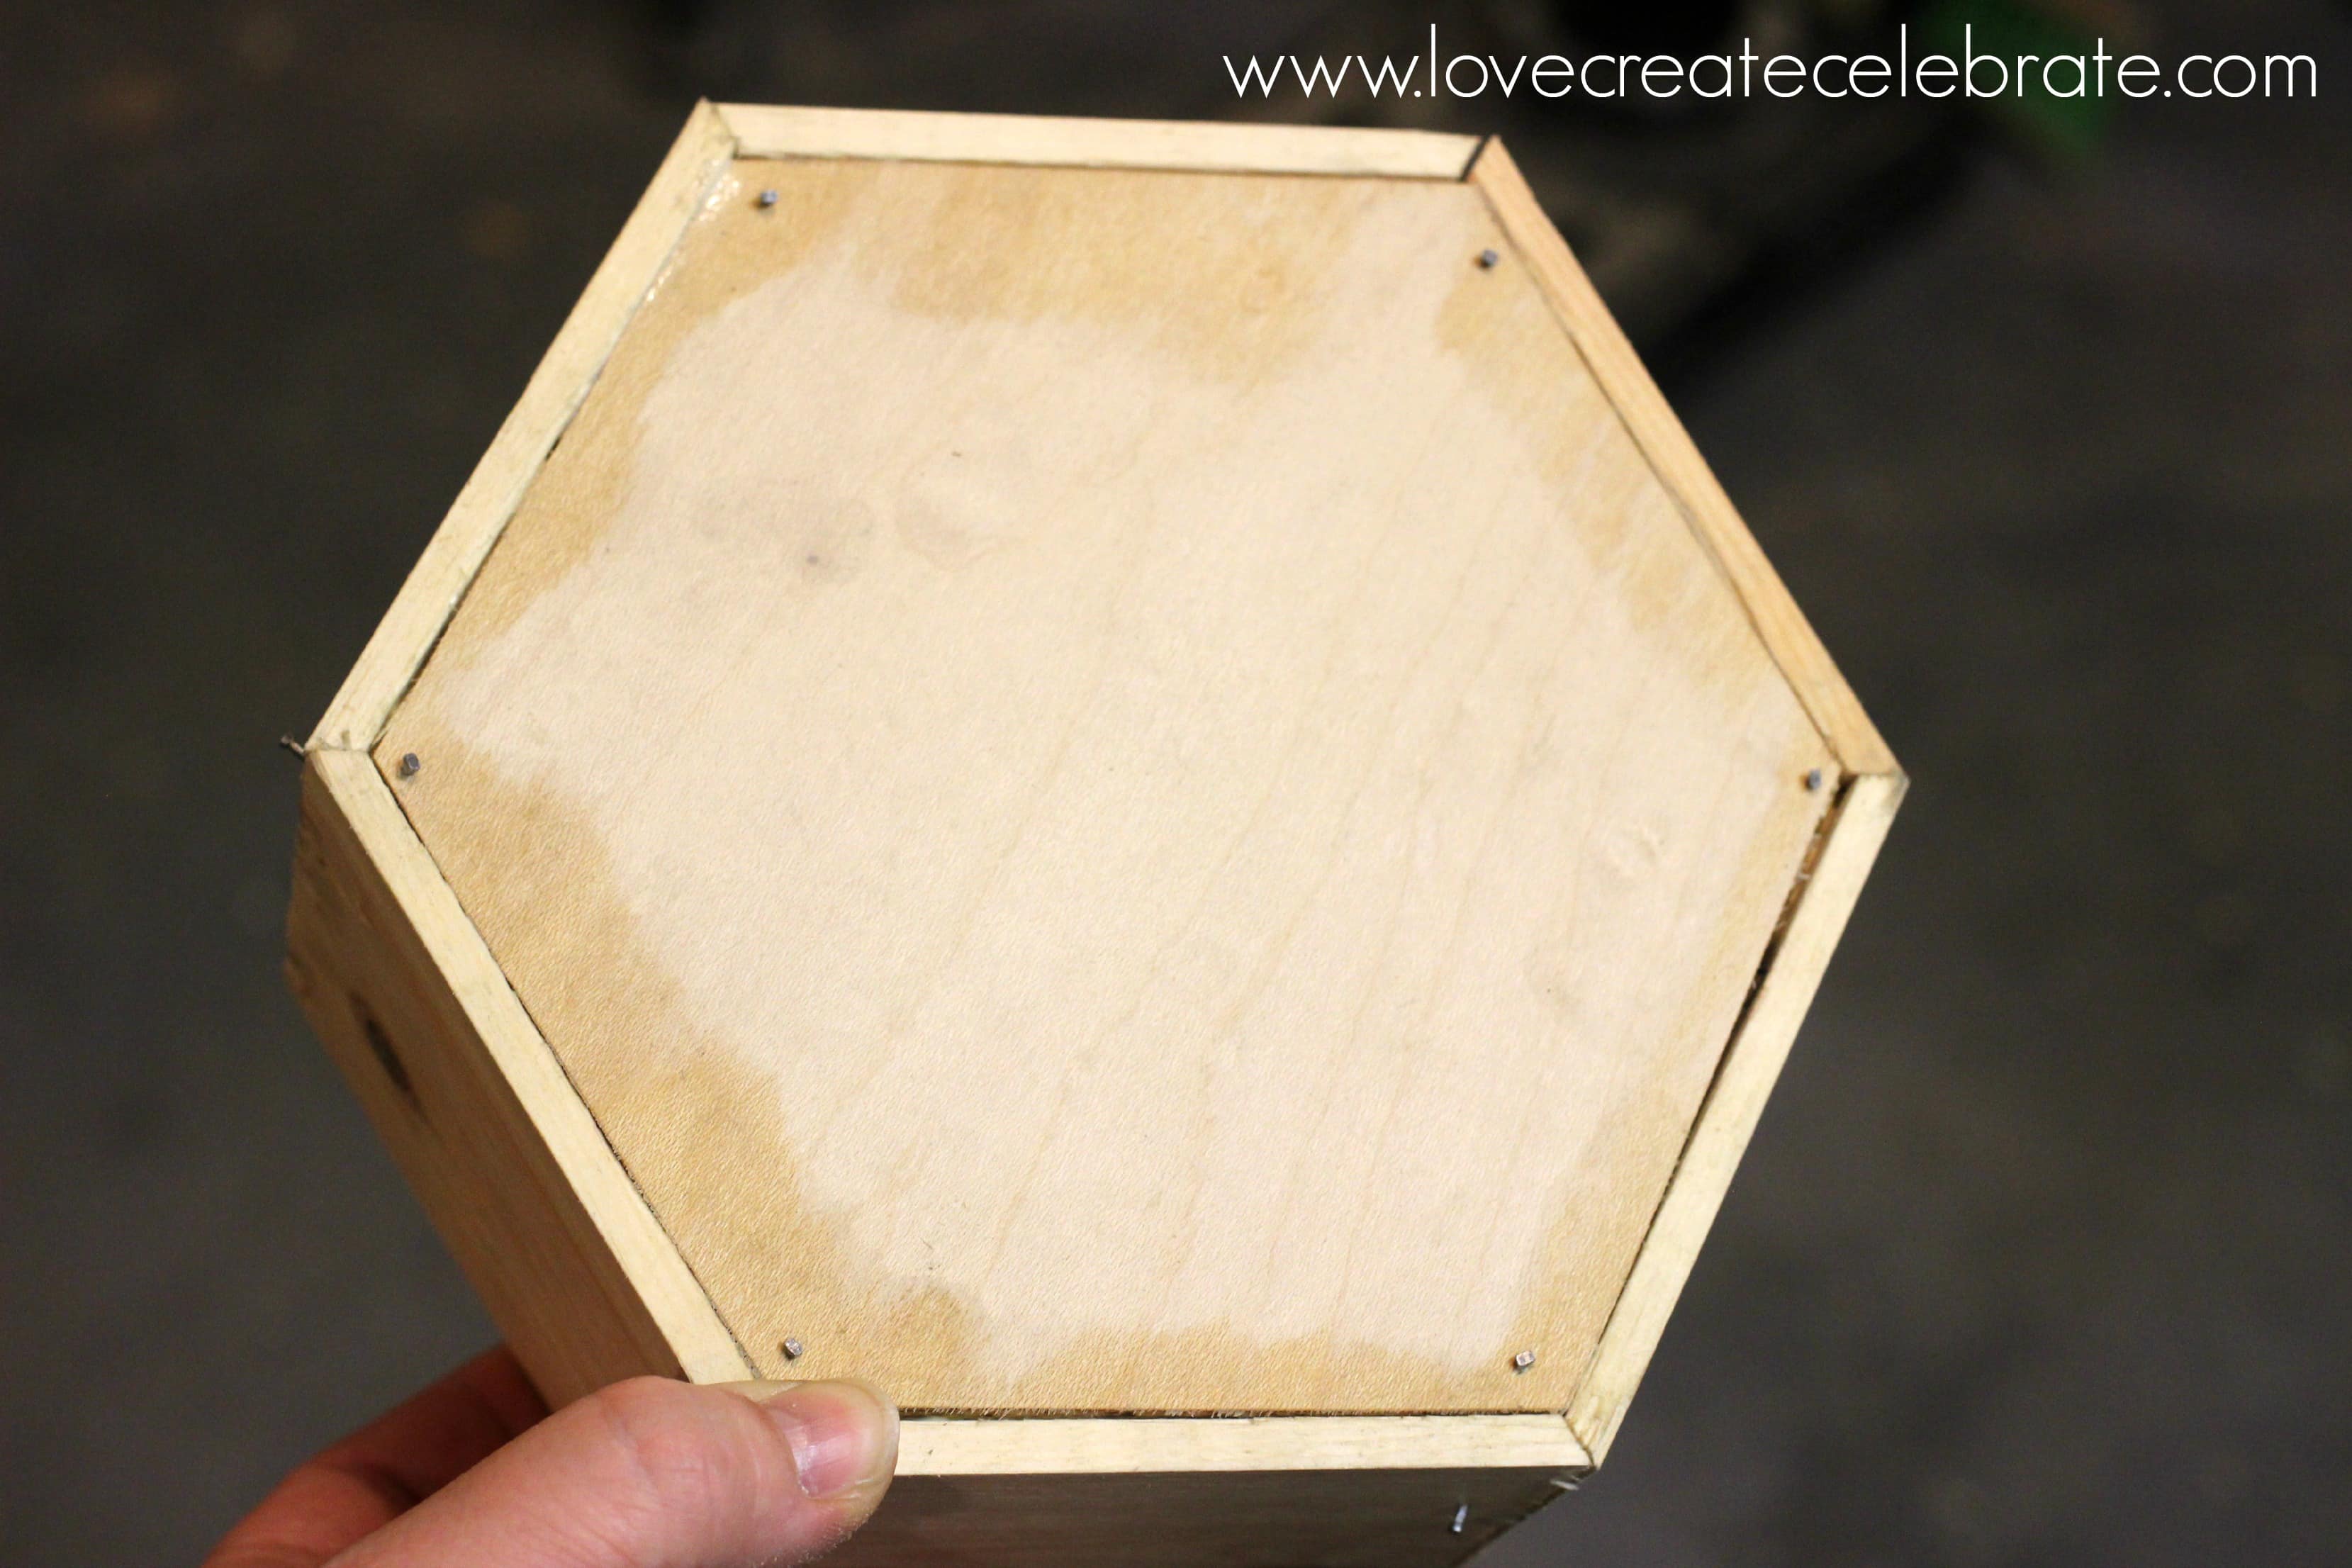 Cut your plywood piece to fit on the front of the hexagon